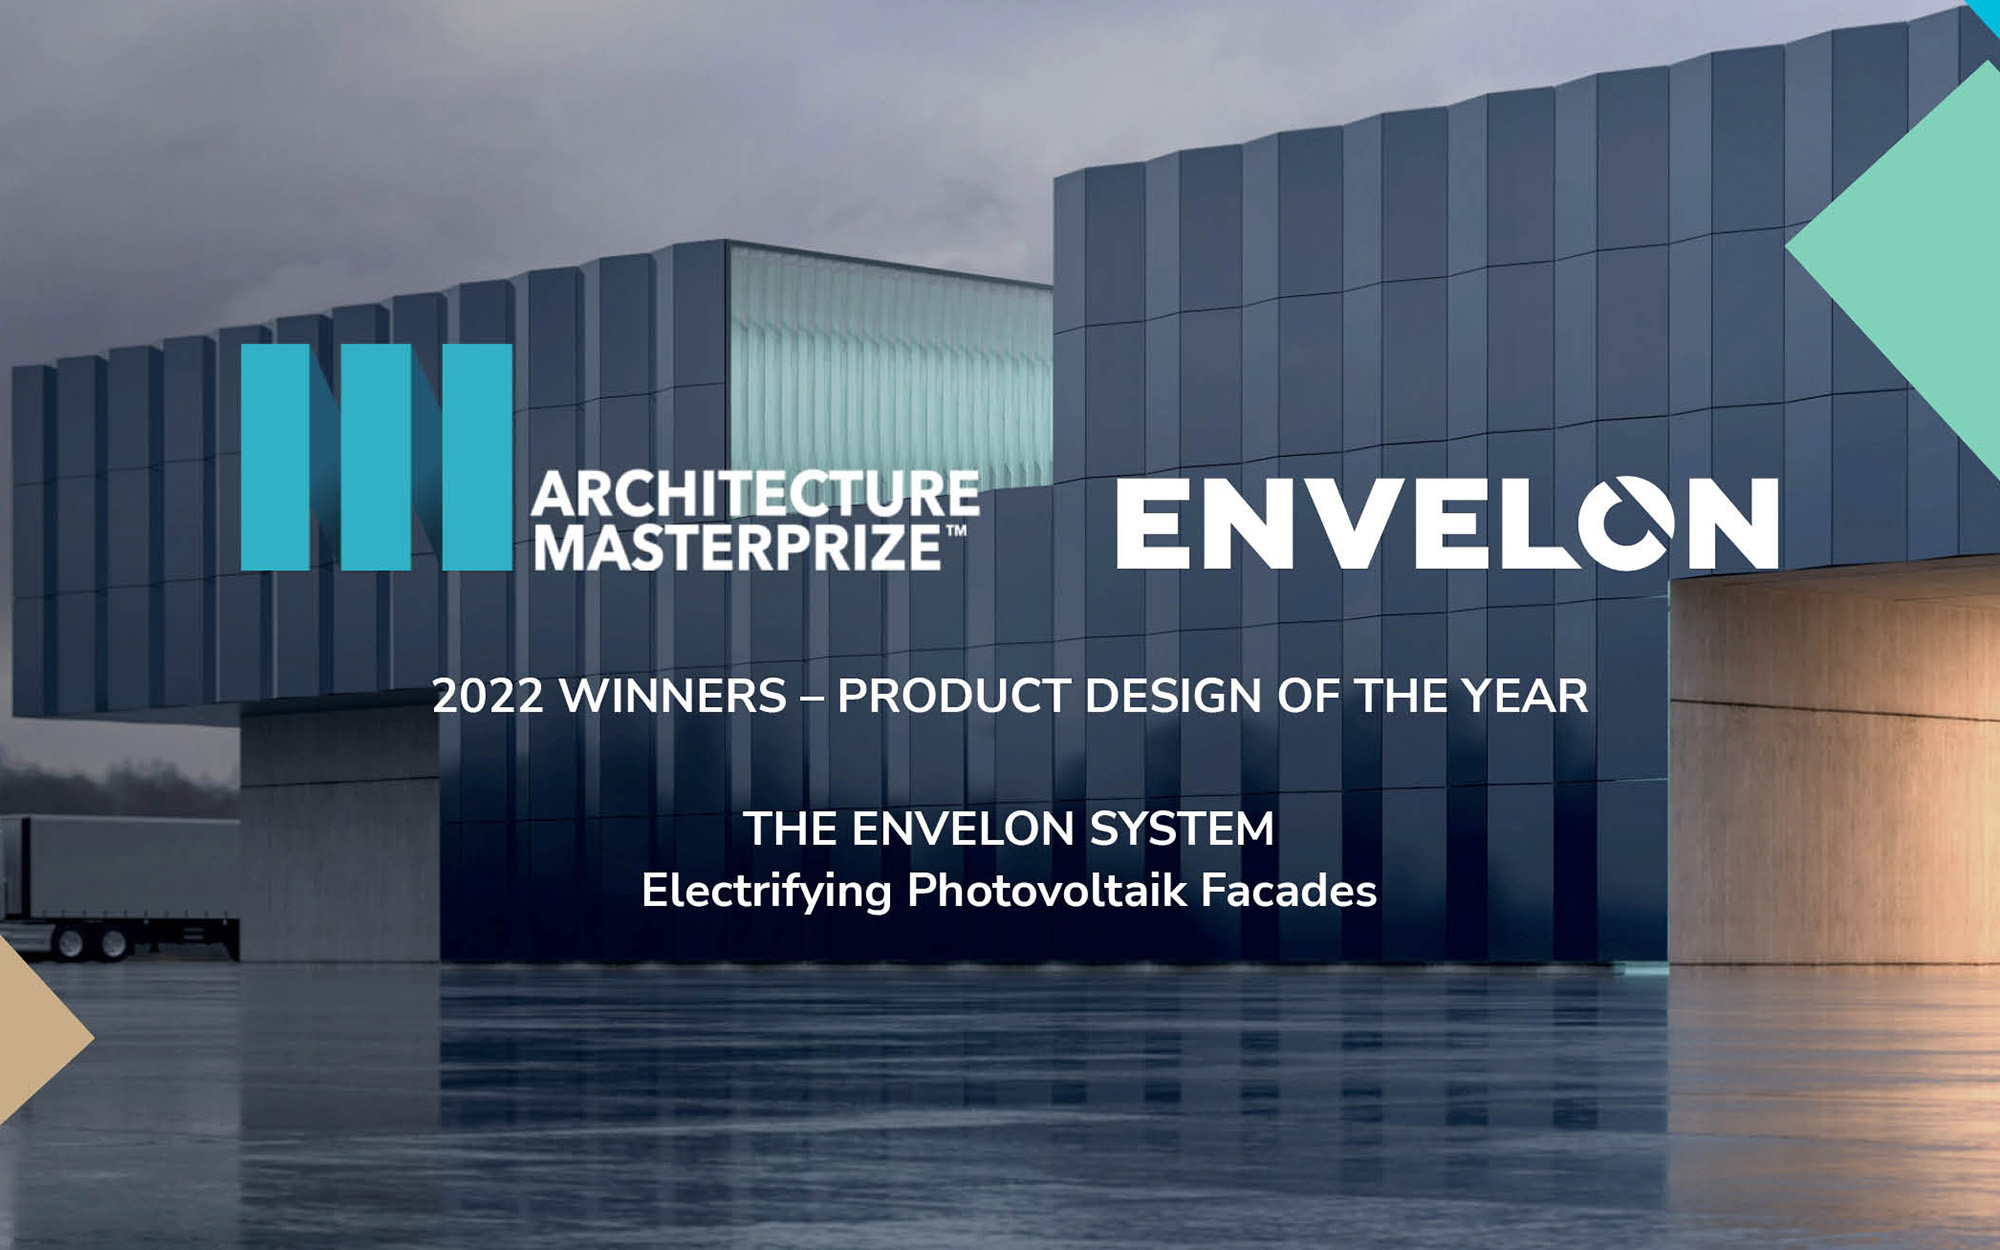 ENVELON wins Architecture MasterPrize Product of the Year